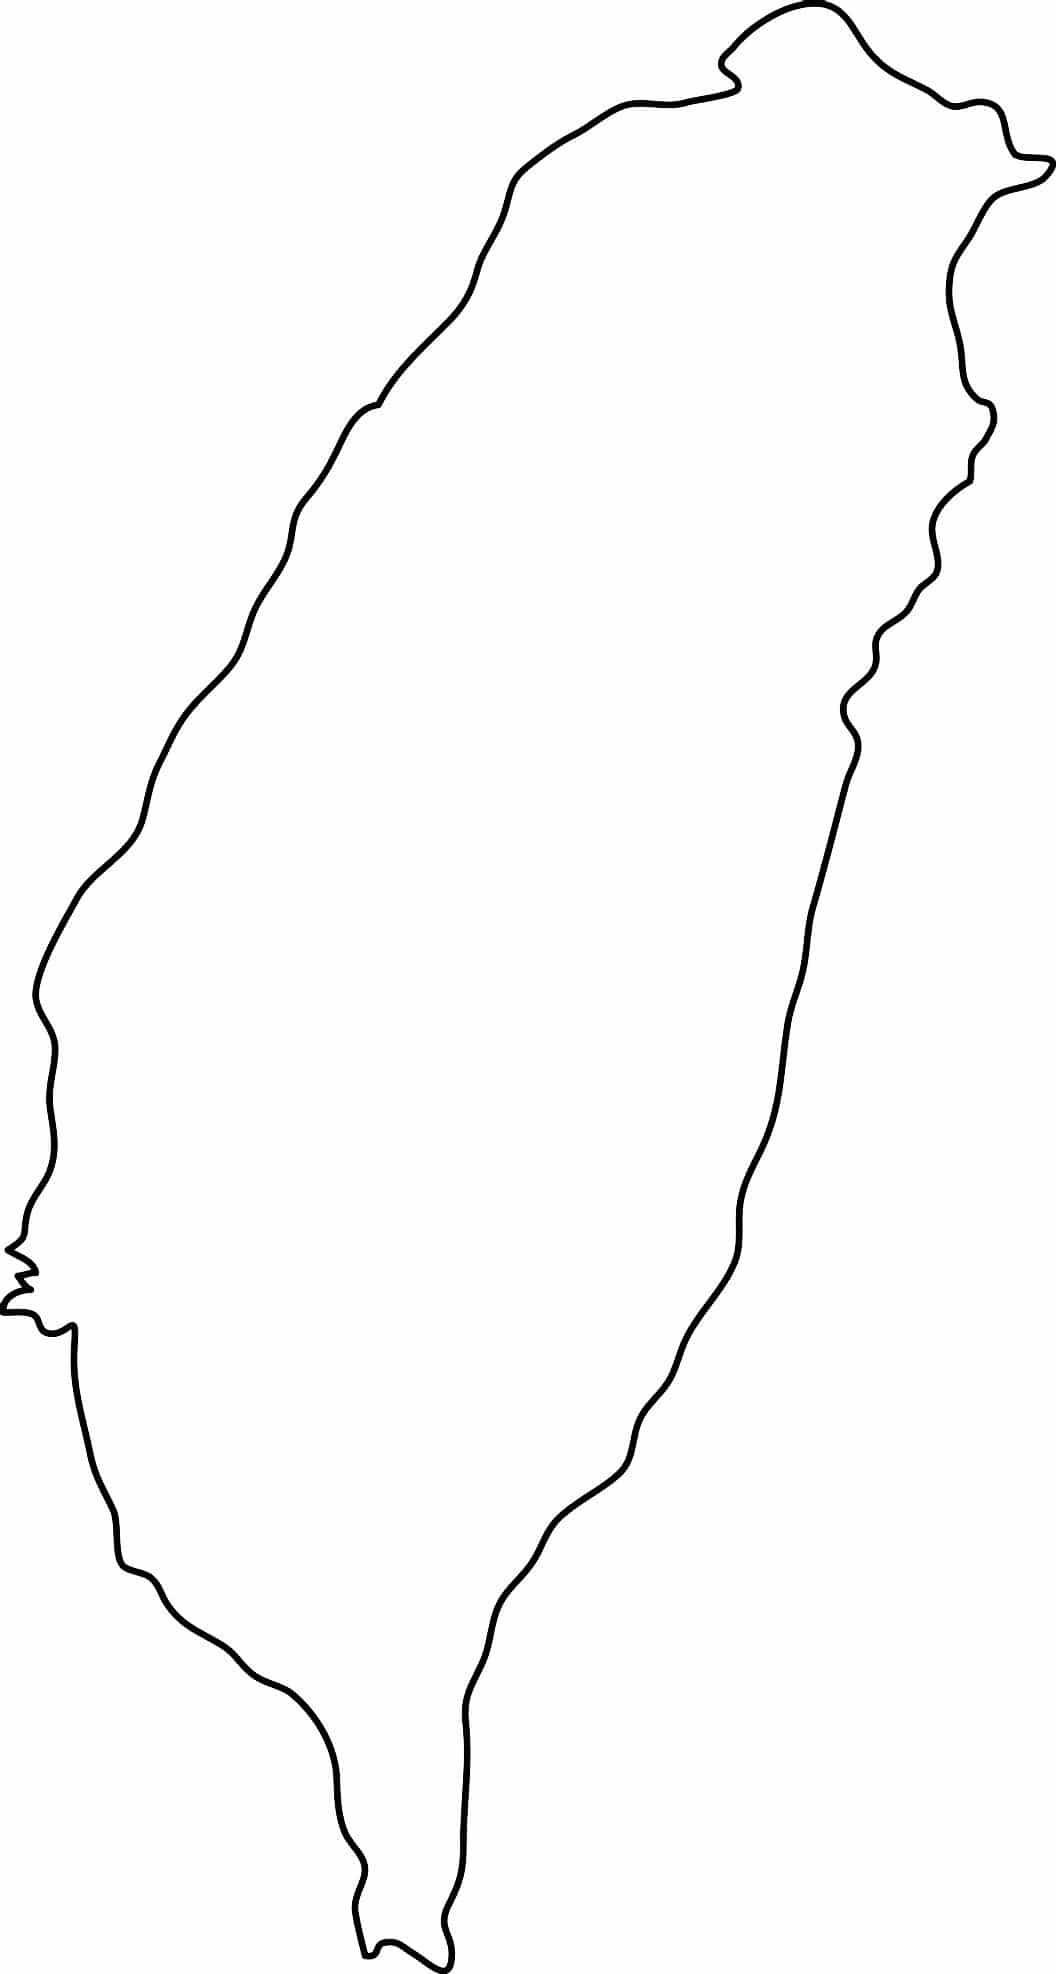 Outline map of Taiwan